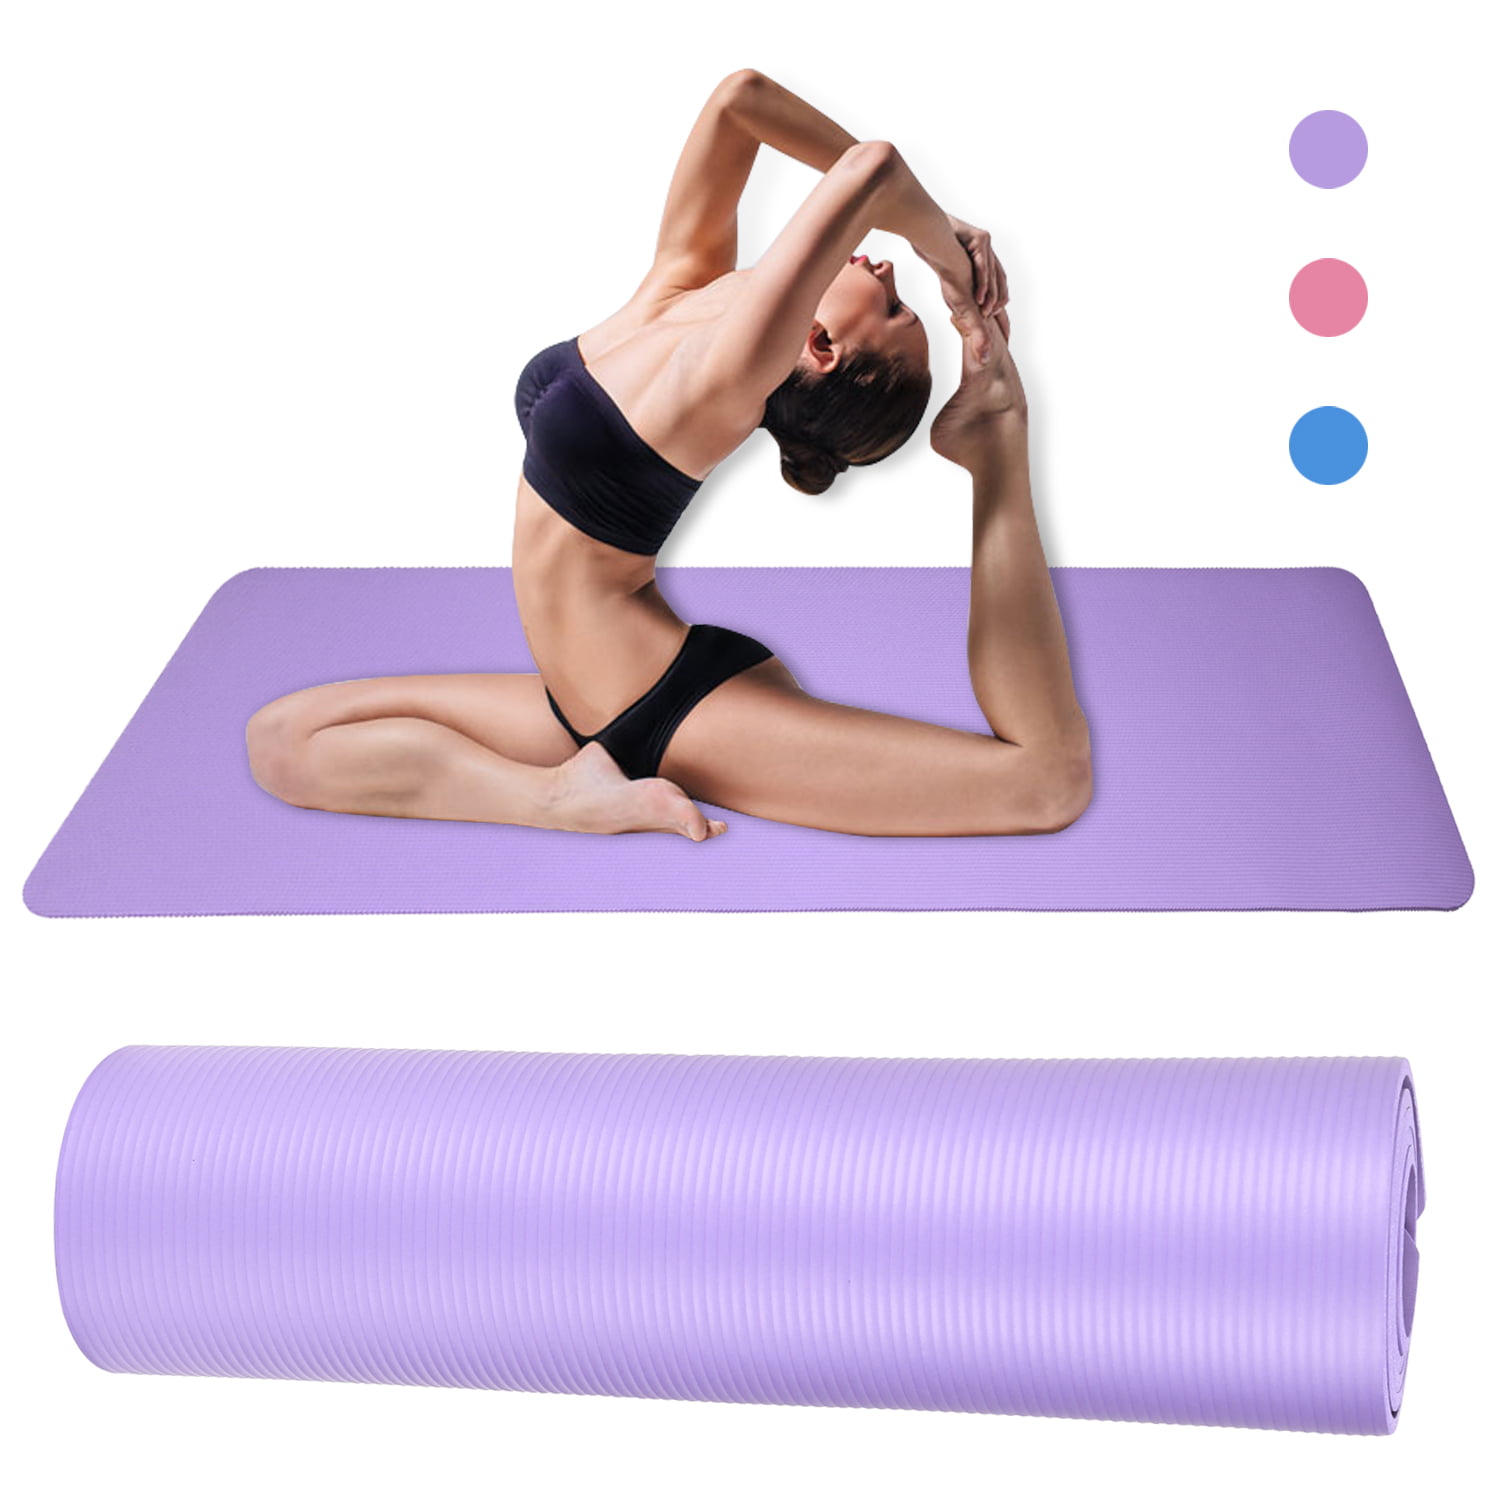 Shop LC Pink Natural NBR Surface Yoga Mat Gym Exercise Accessories Non Skidding 